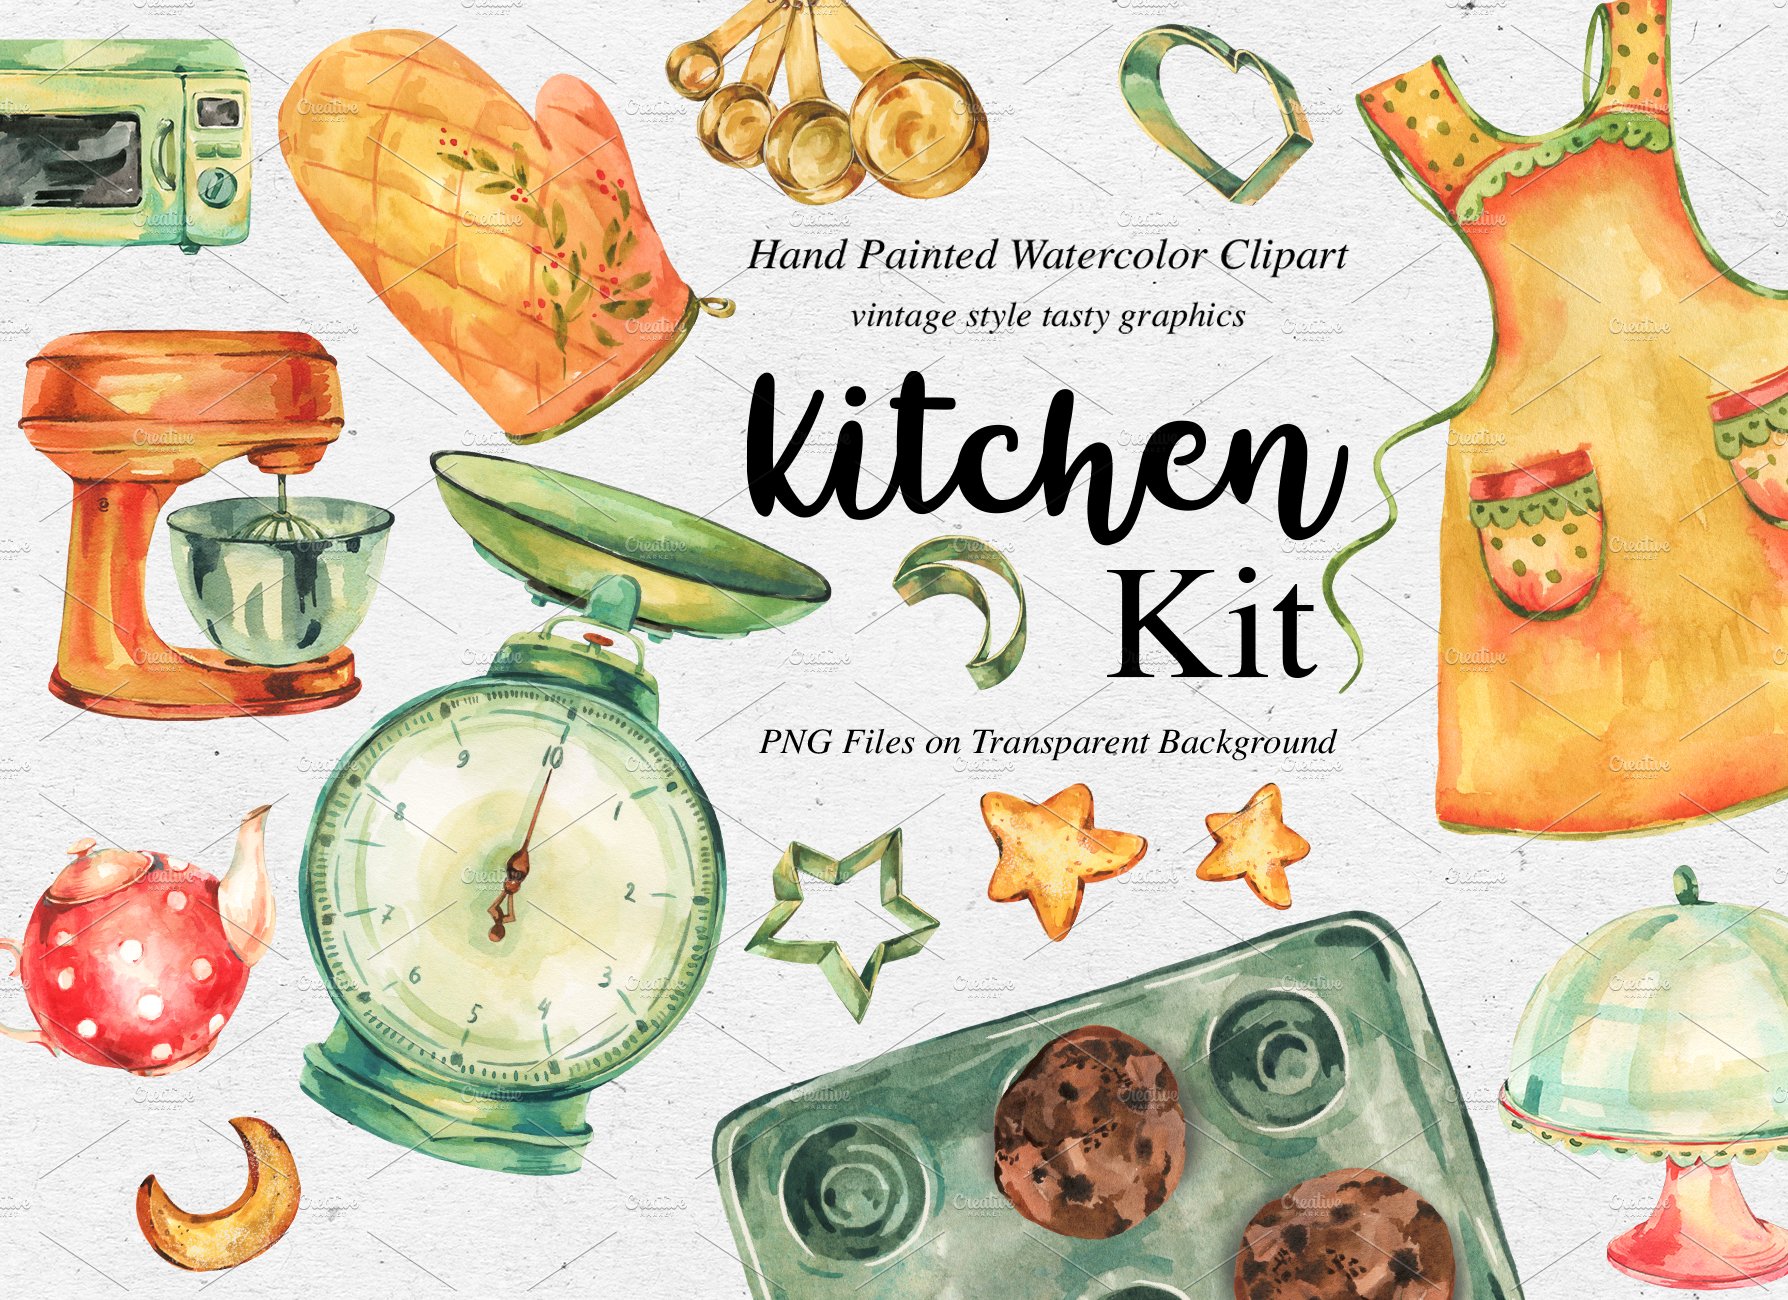 Watercolor kitchen utensils clipart cover image.